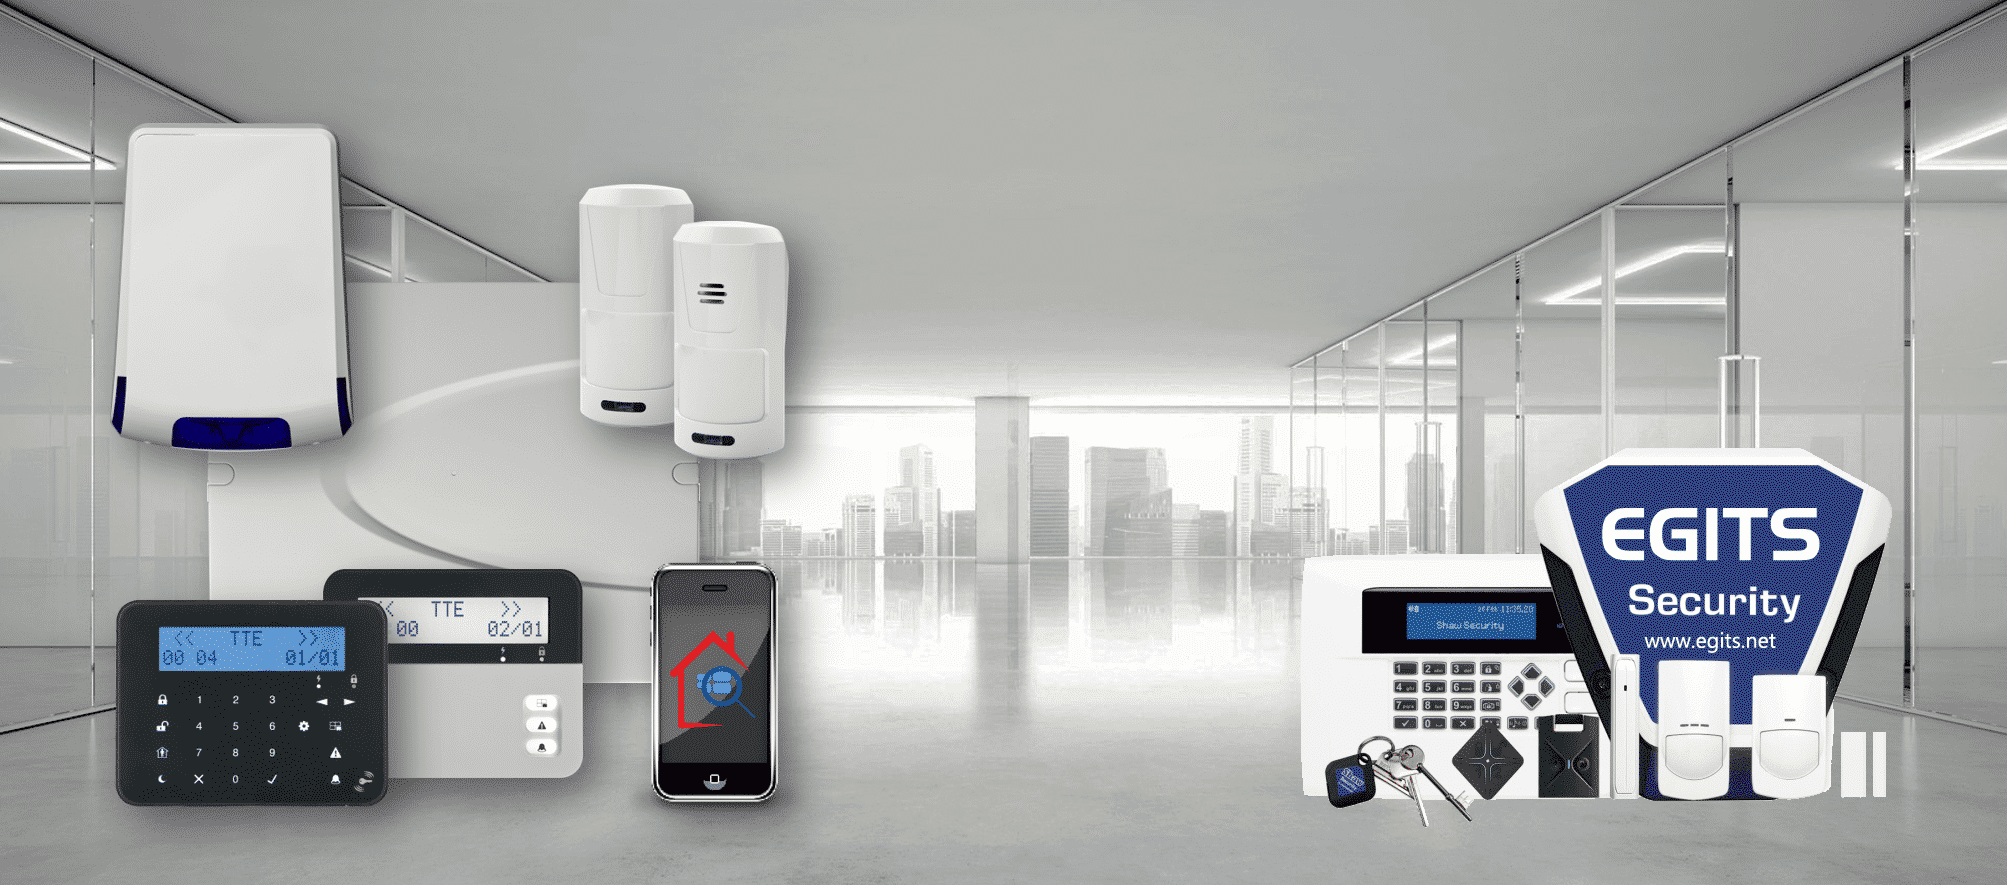 Intruder Alarm Security System Egypt Home Automation Egypt Wireless Security Control Panel, Motion Sensors, Sirens, Door Magnetic Contacts, Security Software